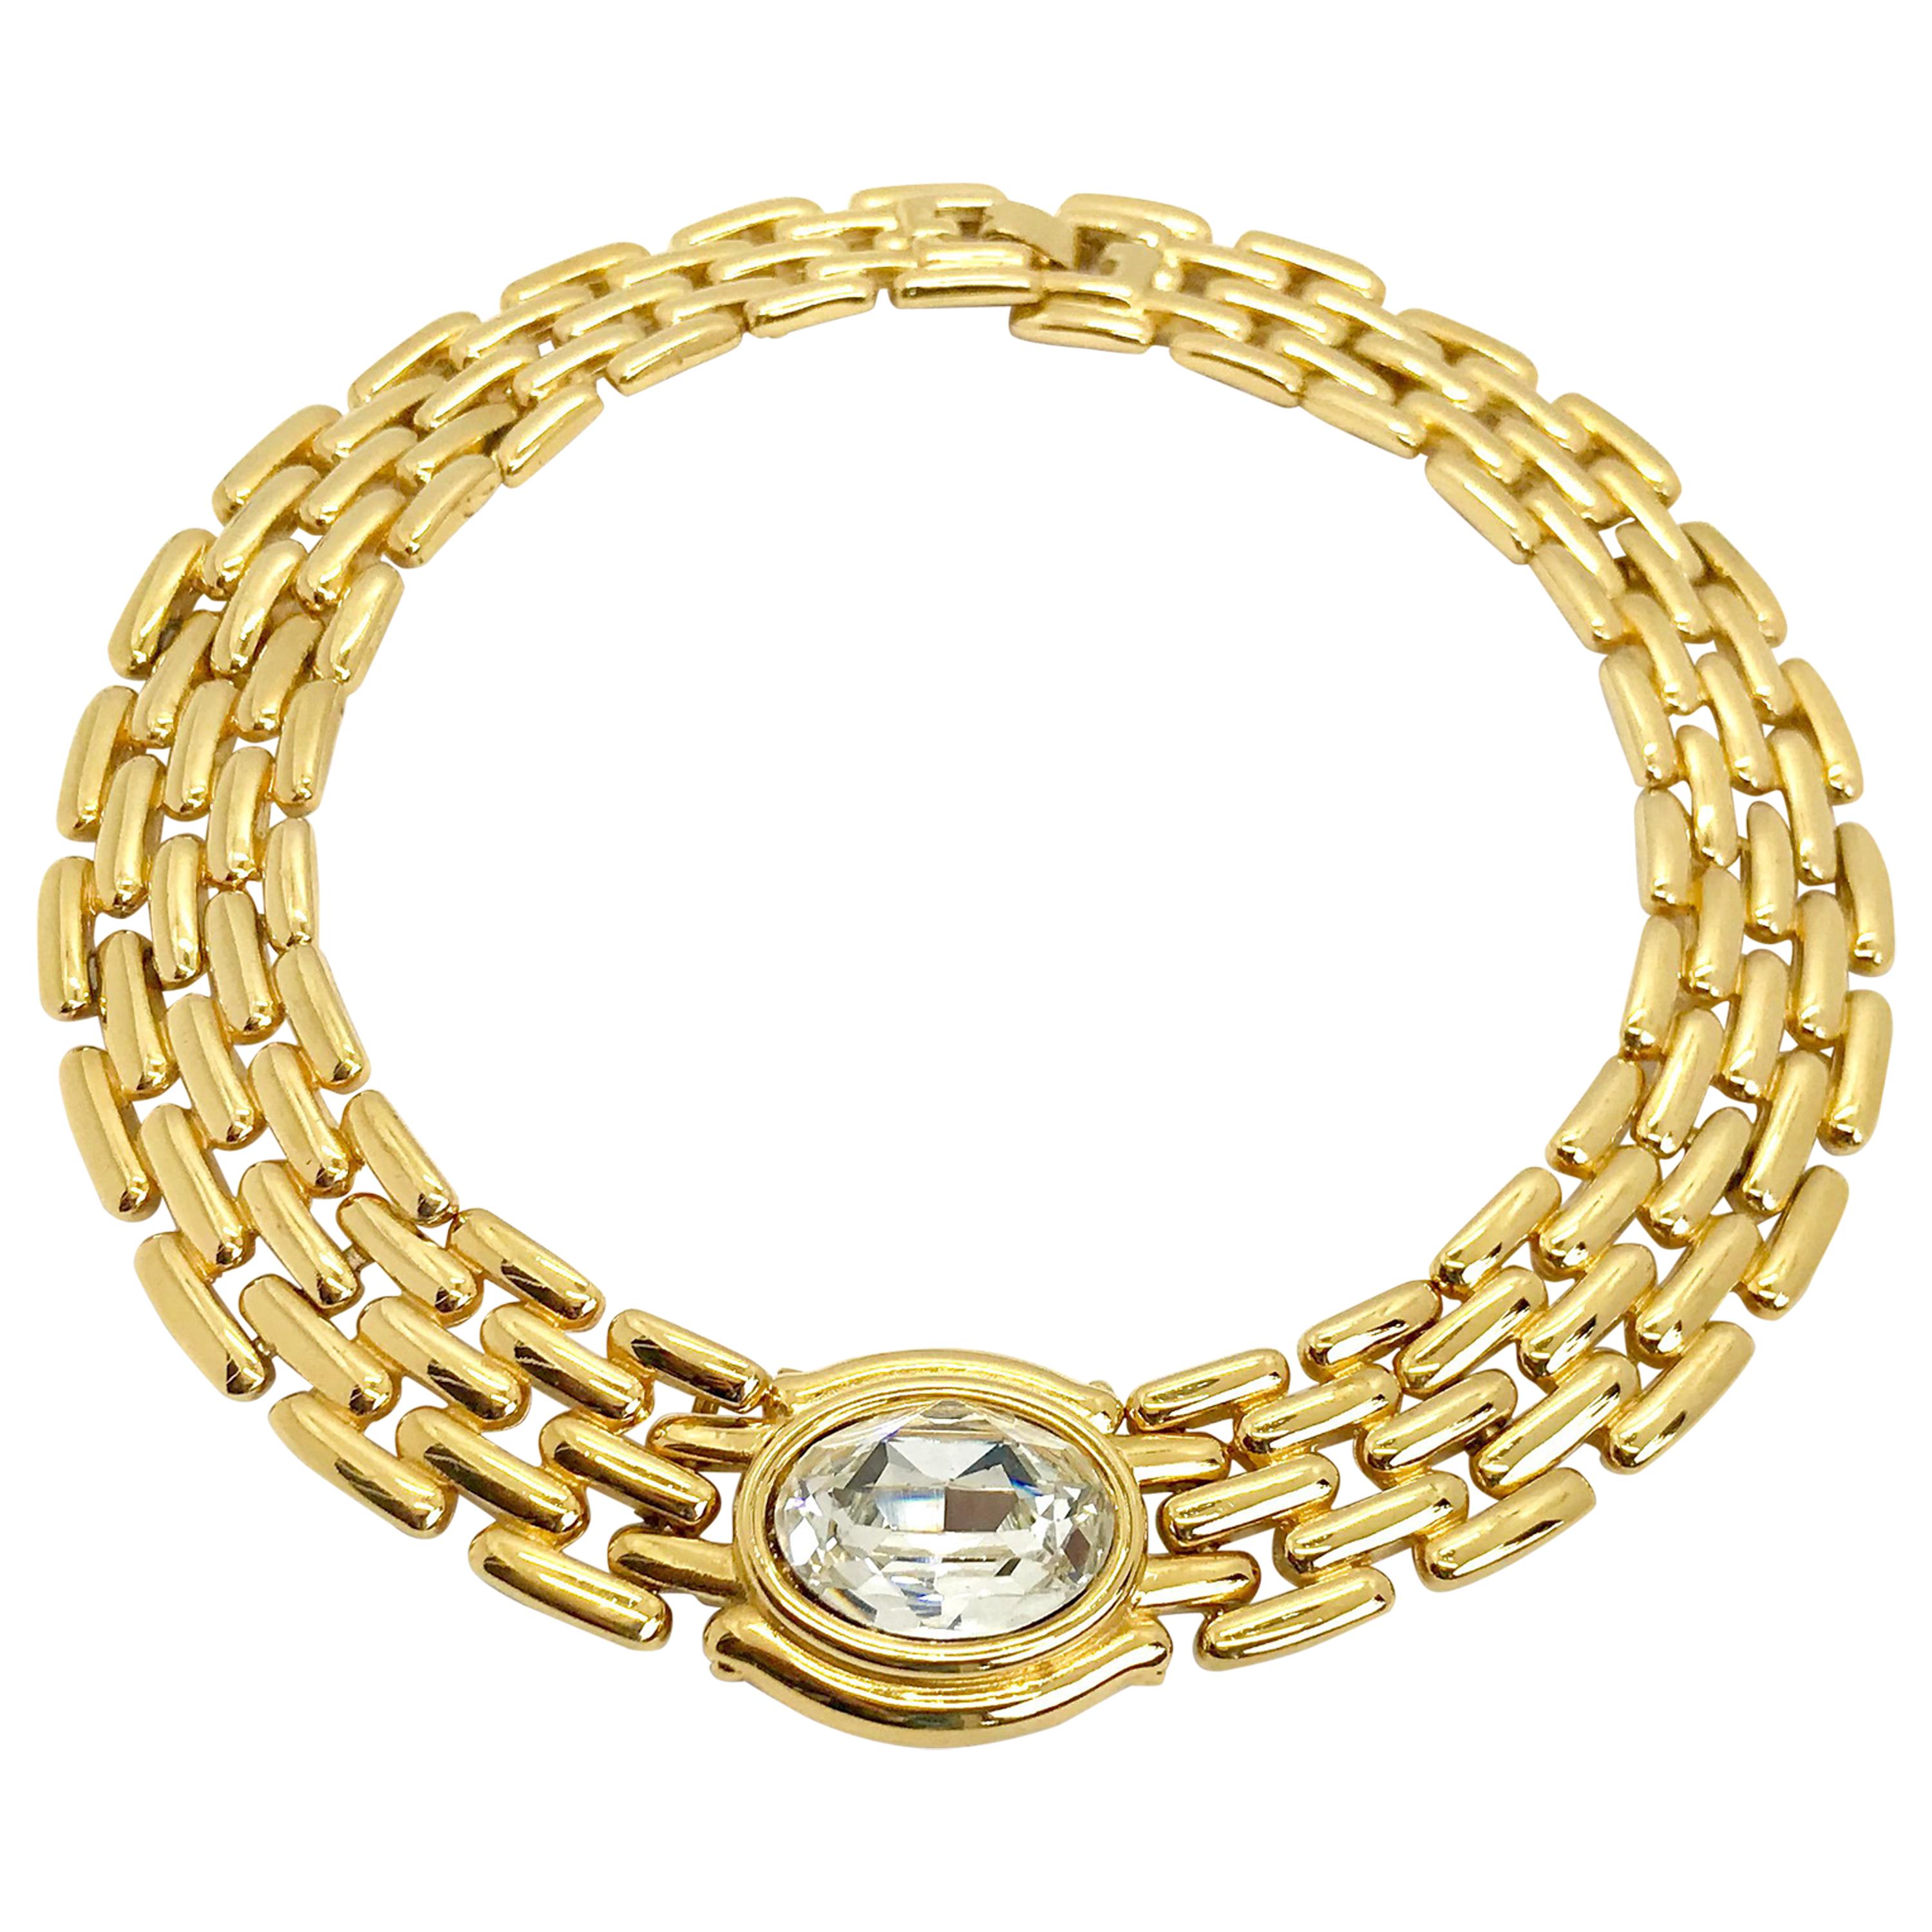 Givenchy 1980s Vintage Statement Collar Necklace